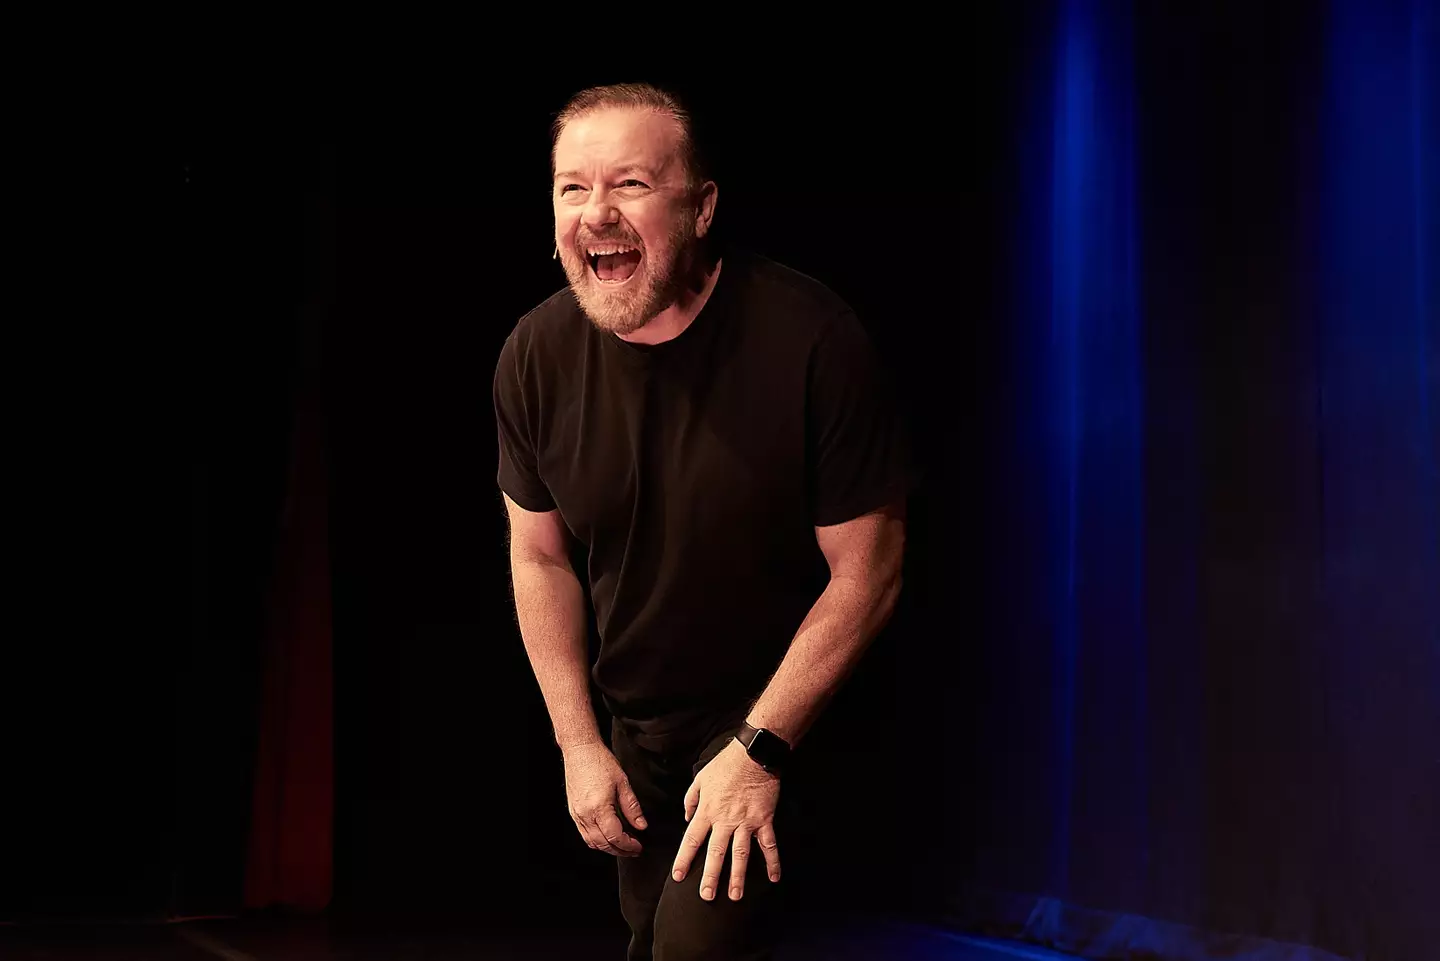 Ricky Gervais' Armageddon tour has smashed yet another record.